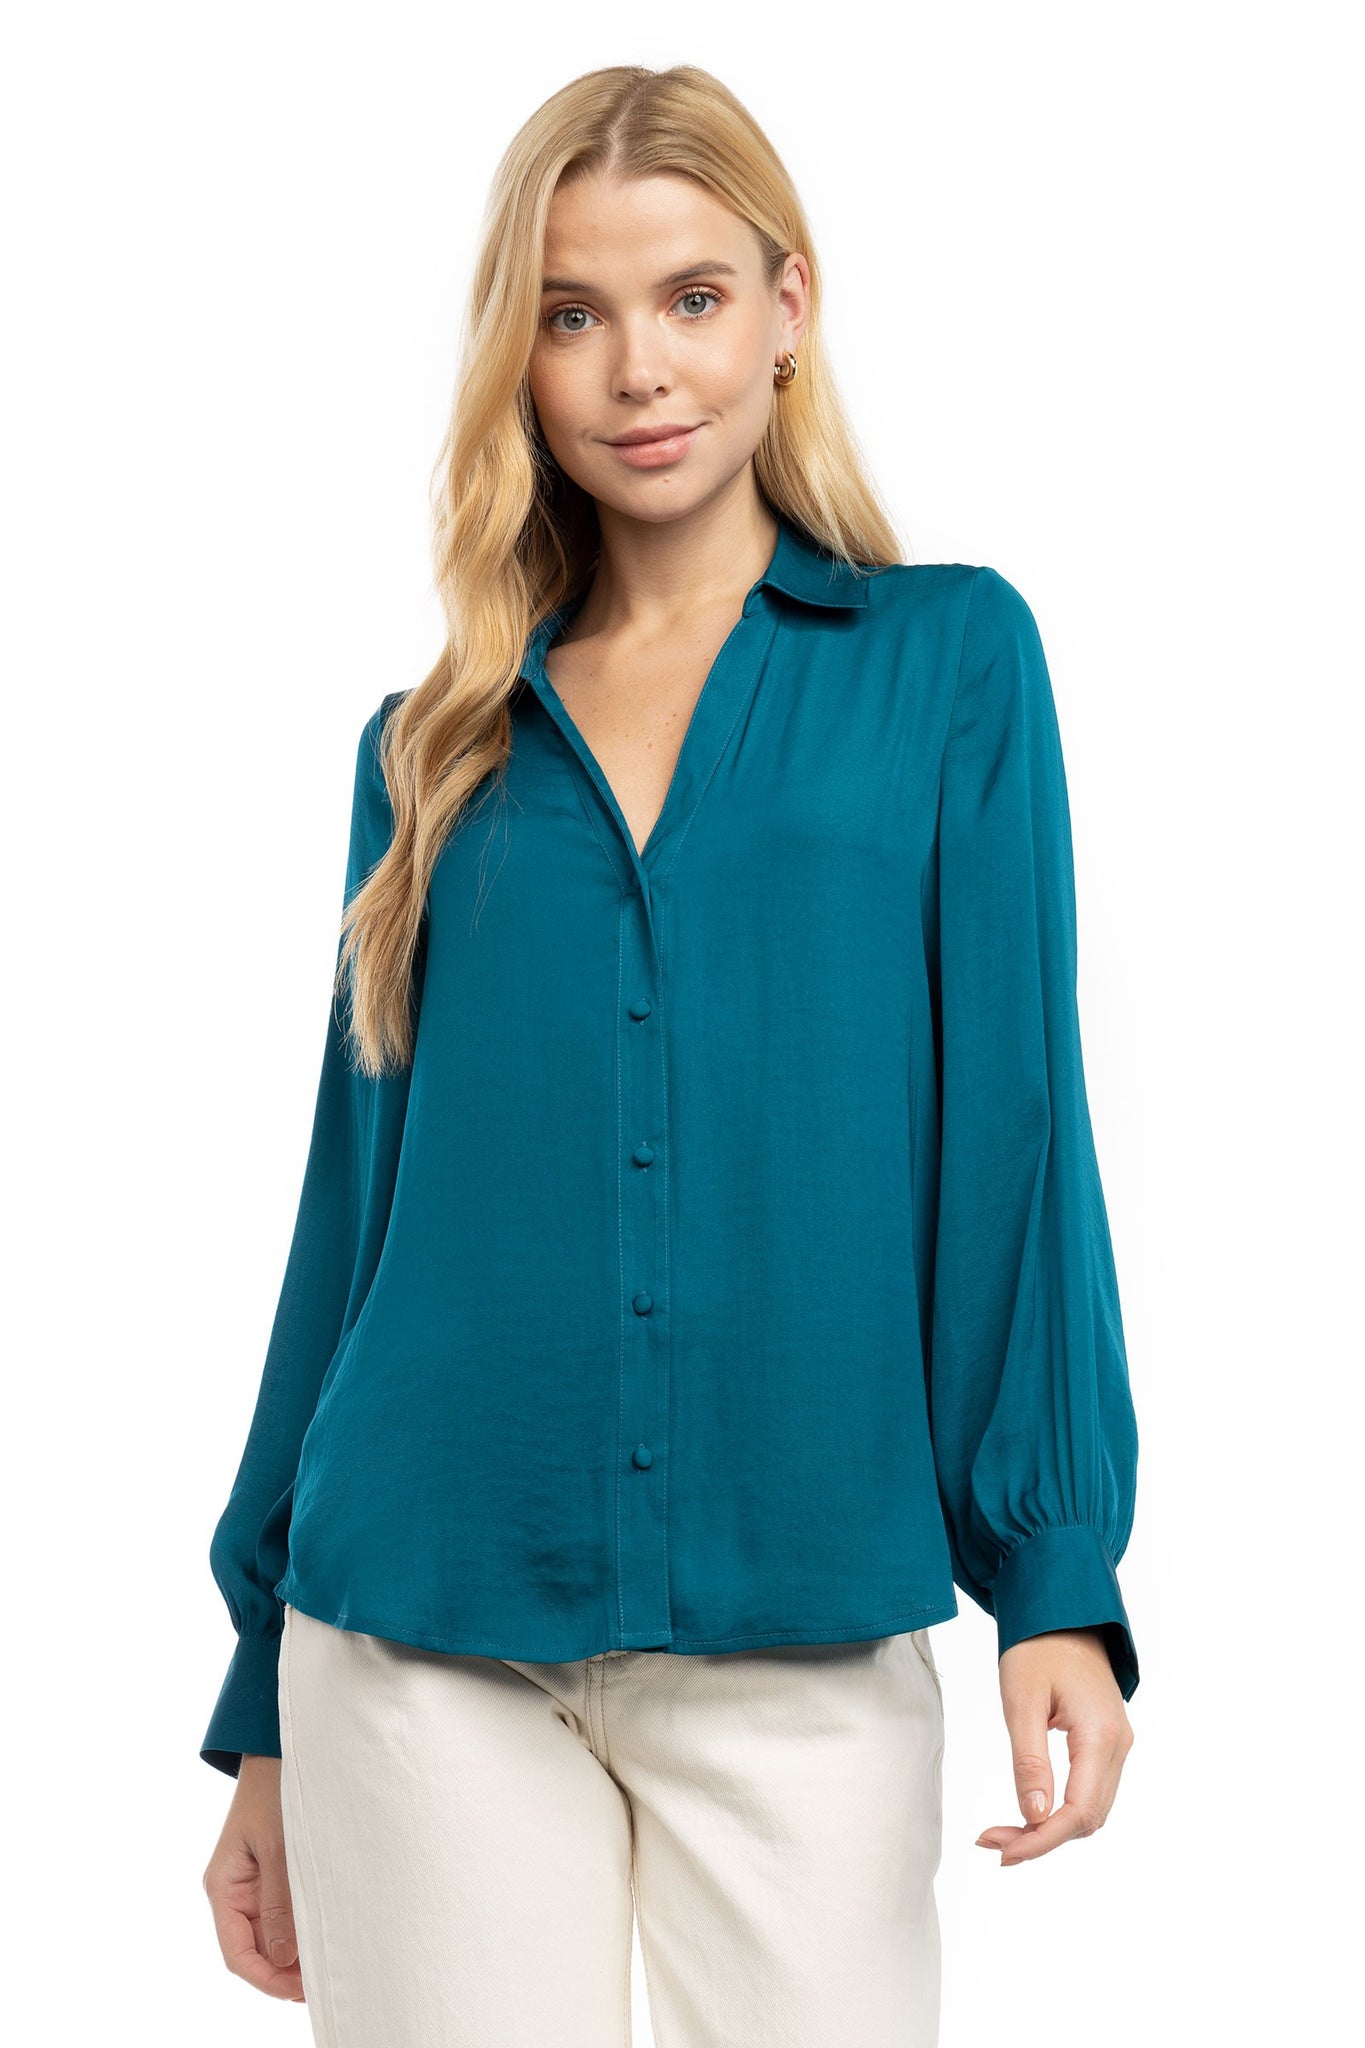 Teal Button Up